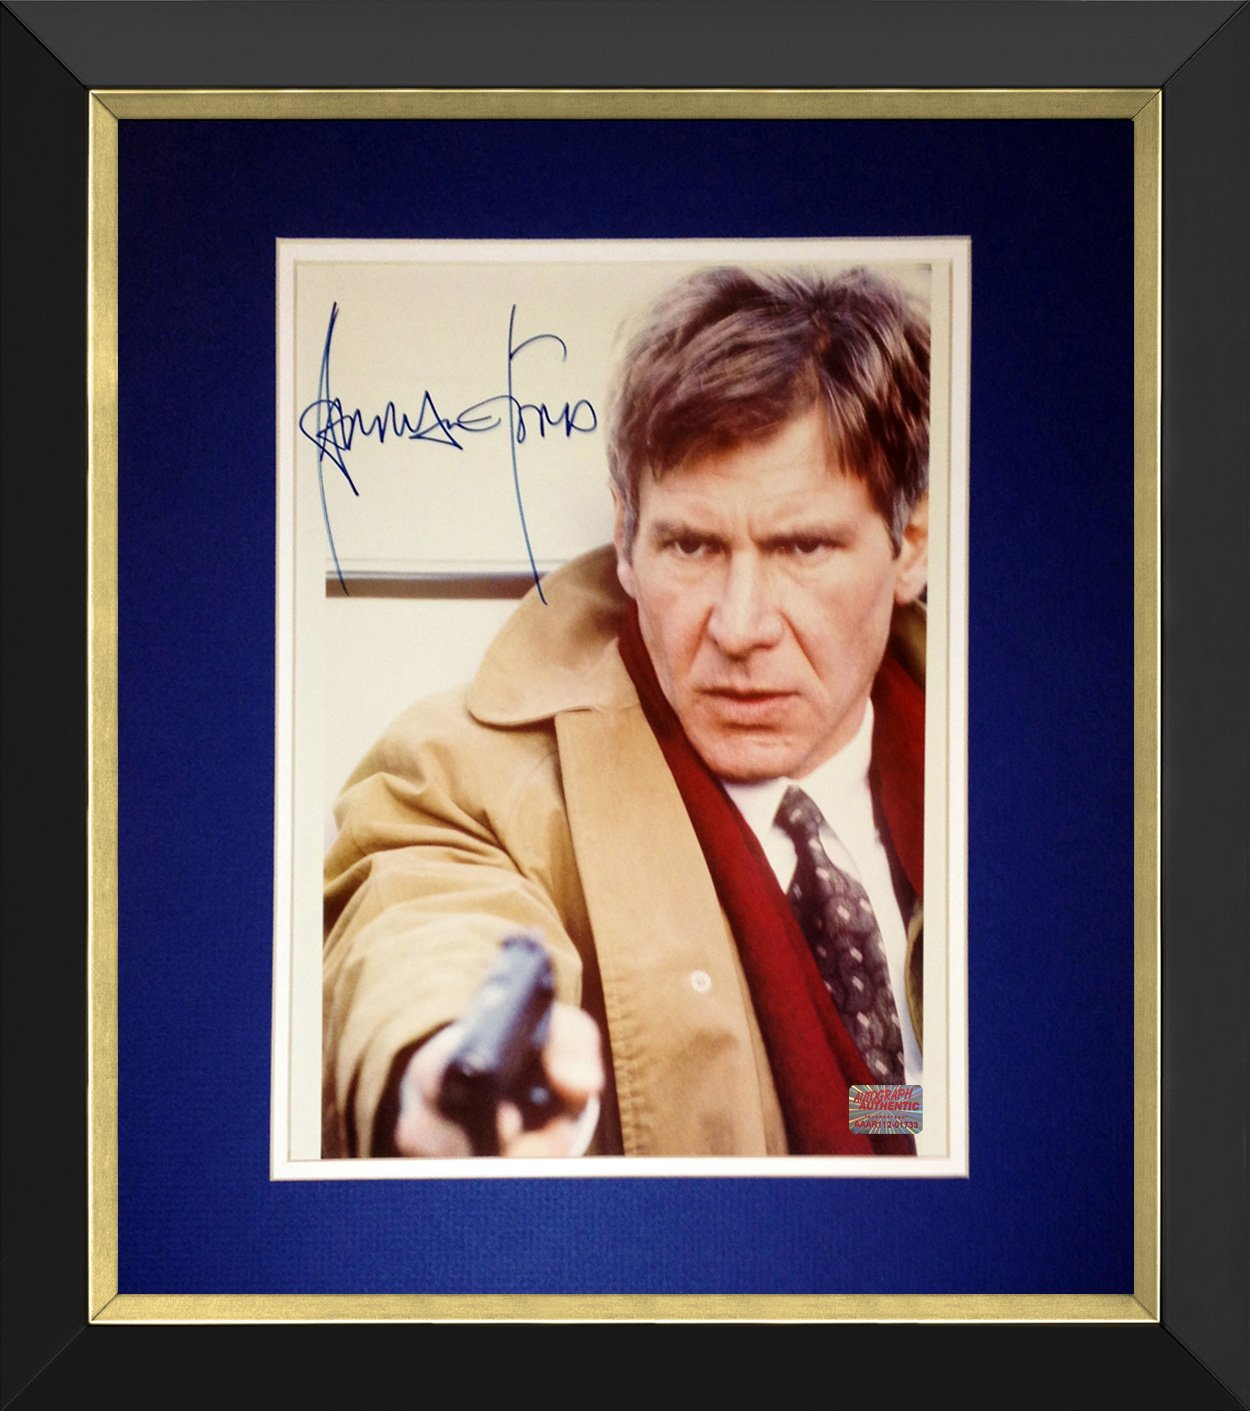 Framed 8x10 Photograph The Fugitive, Signed by Harrison Ford